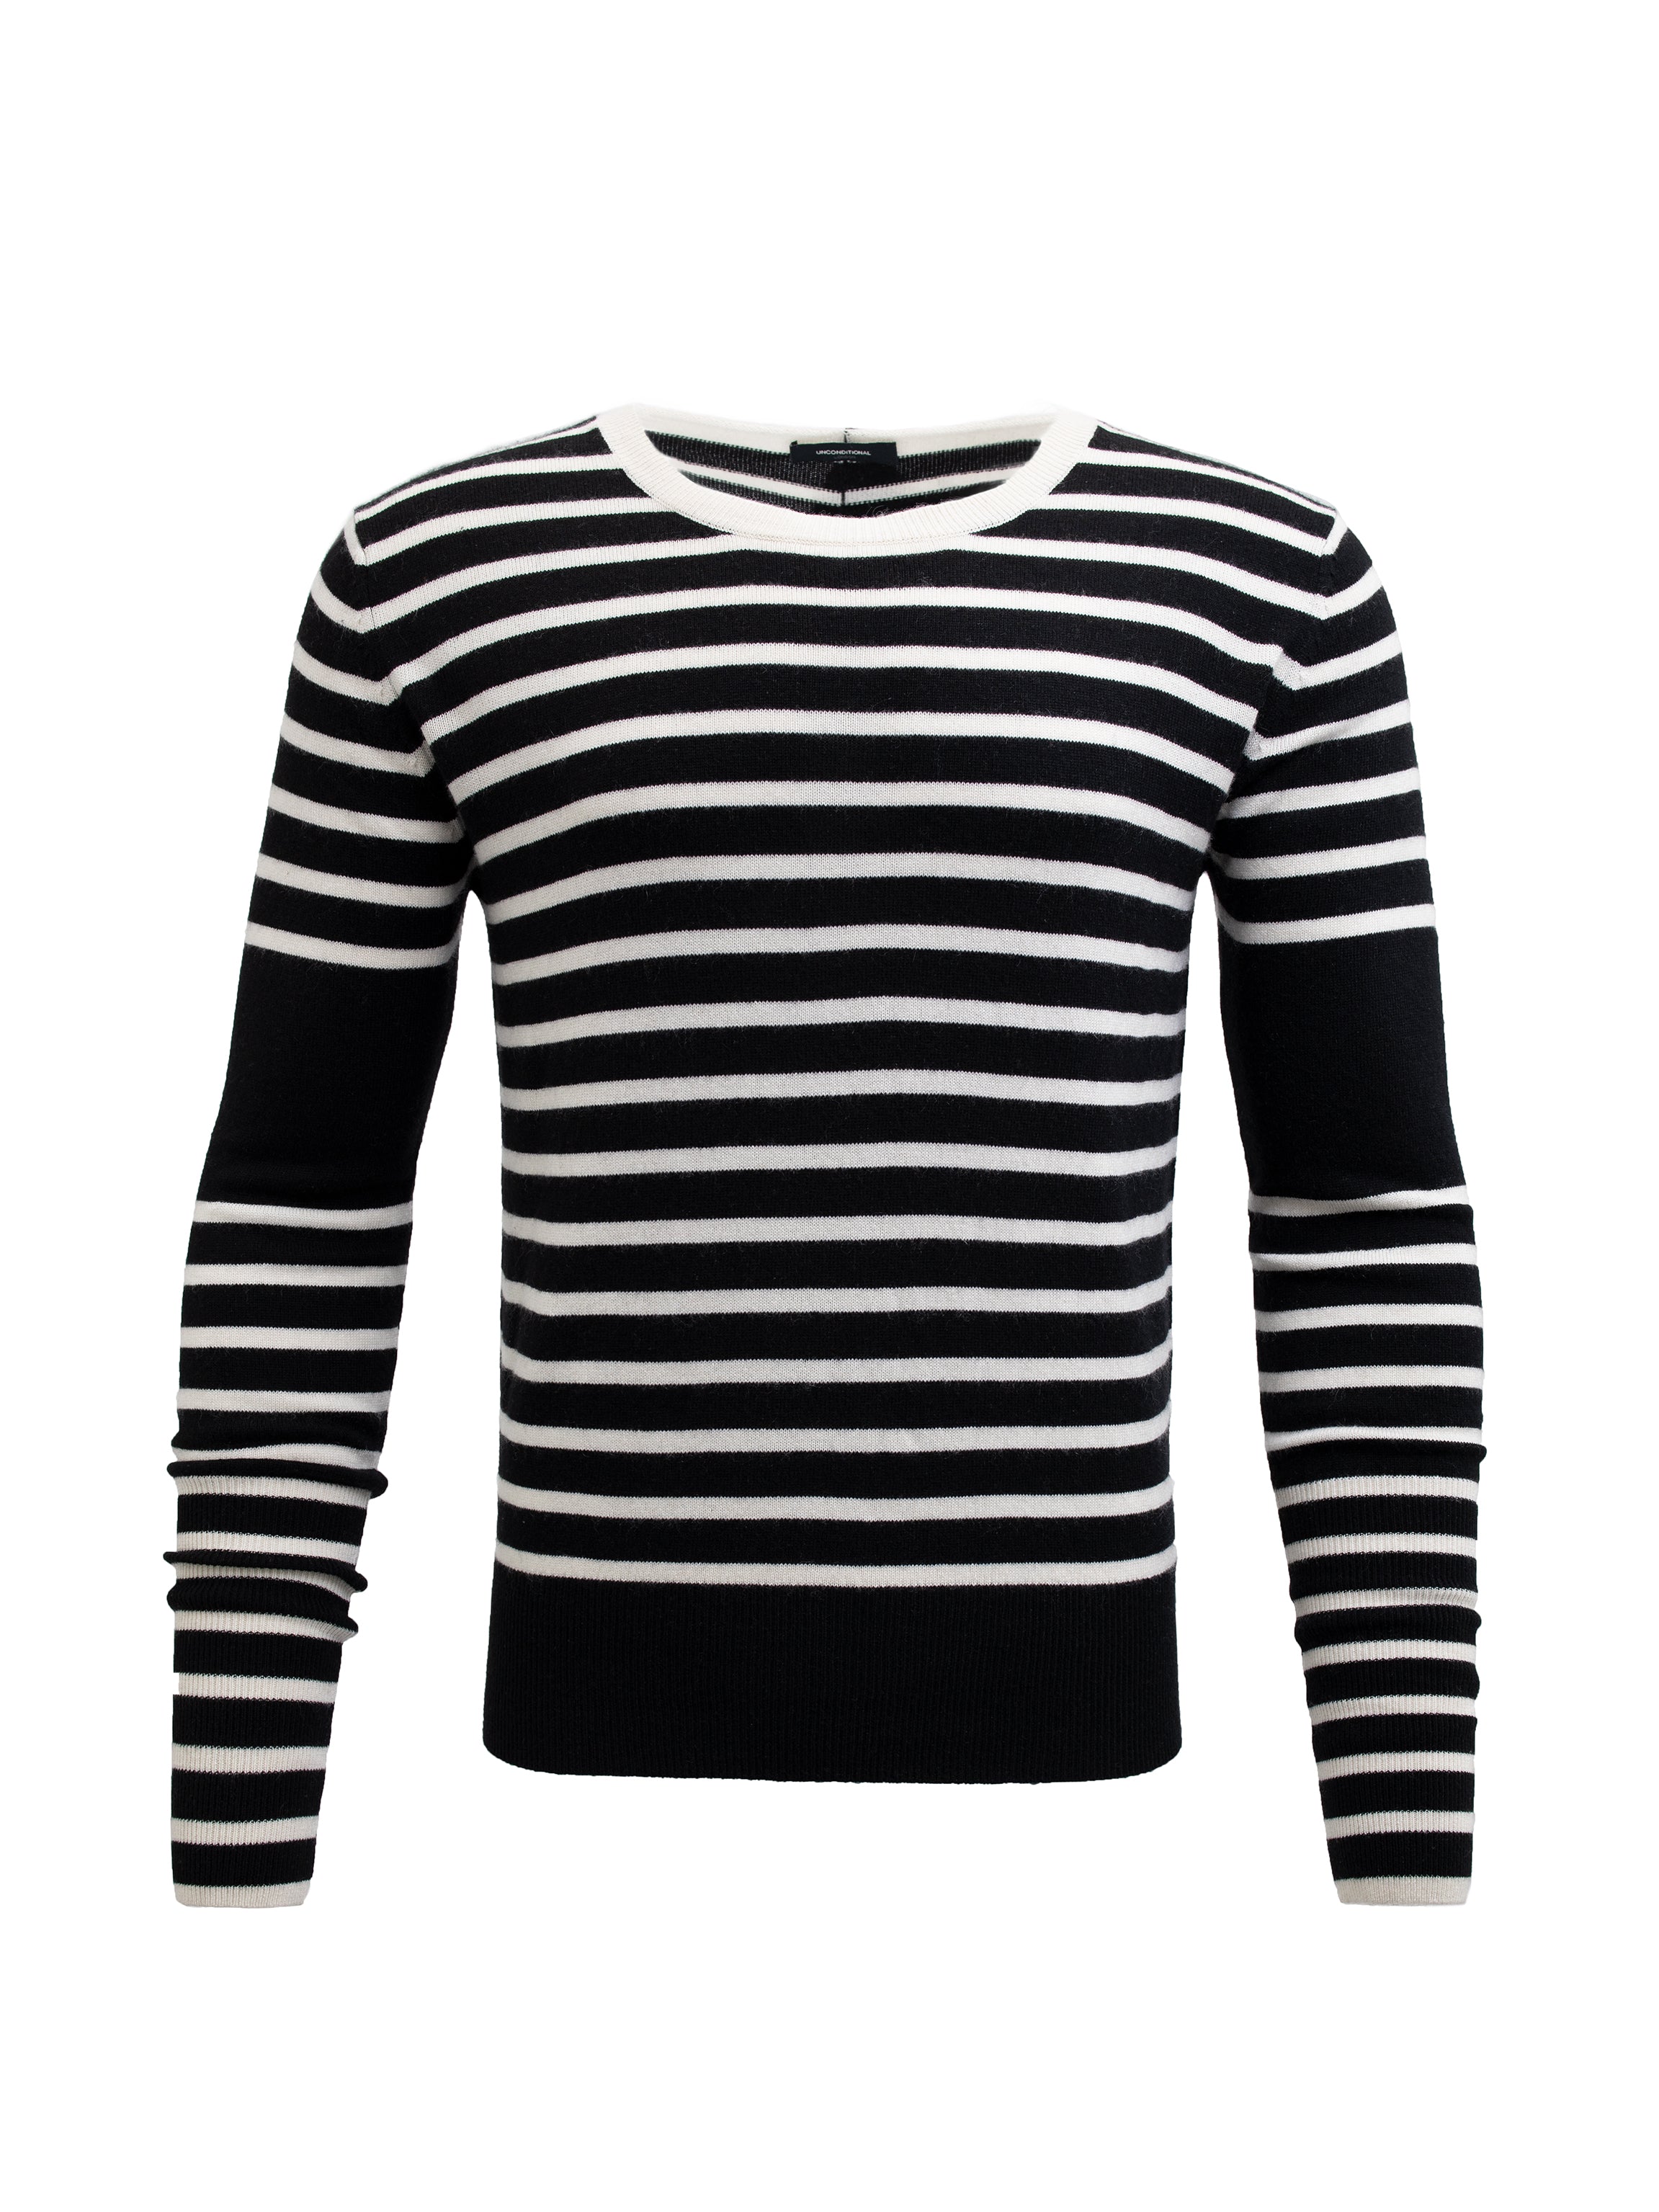 Black and Cream Striped Jumper with Integrated Spine